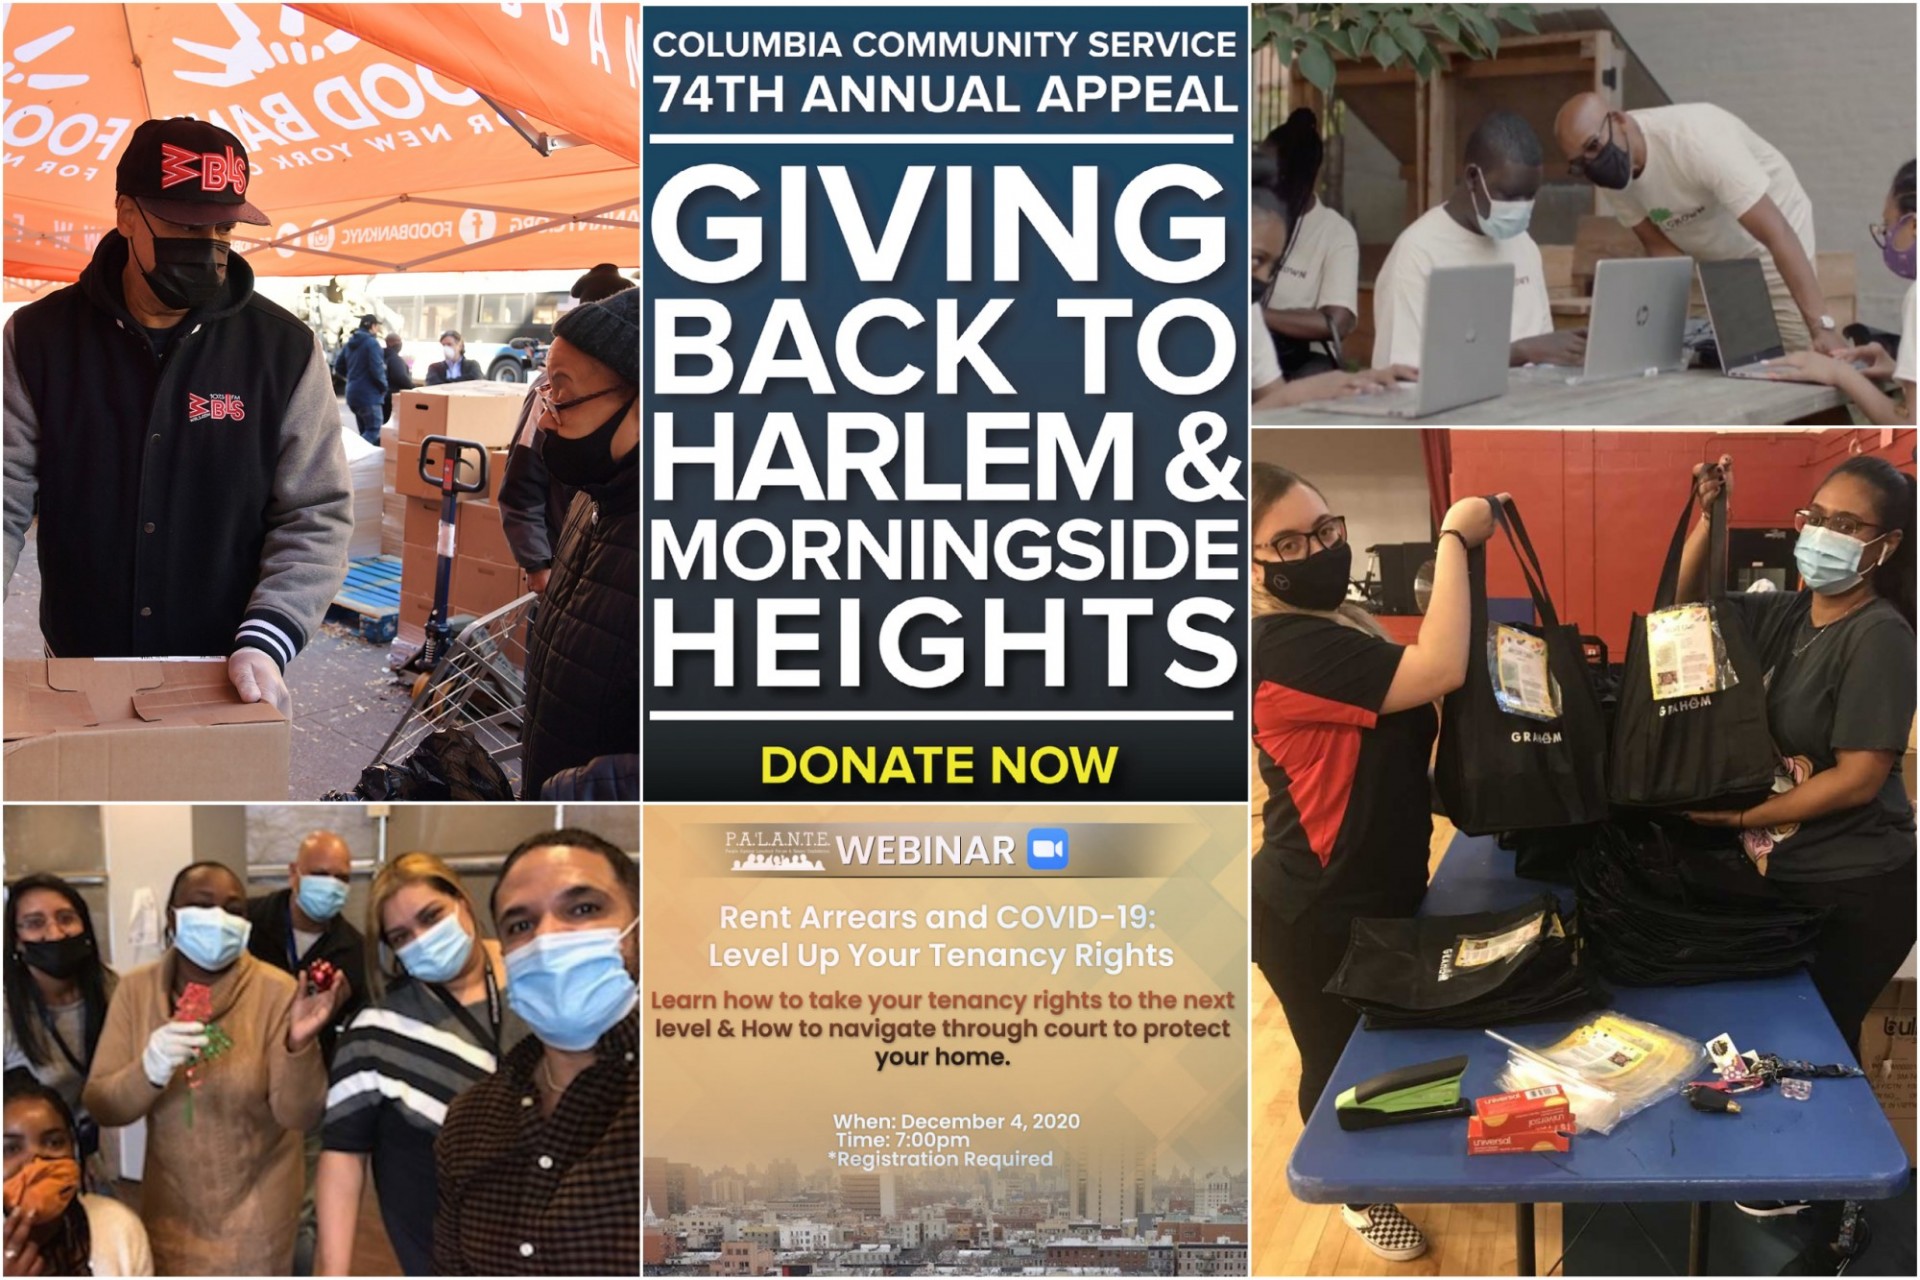 A graphic saying "I donated to the Columbia Community Service 74th Annual Appeal: Giving Back to Harlem & Morningside Heights" surrounded by images of CCS grantees.